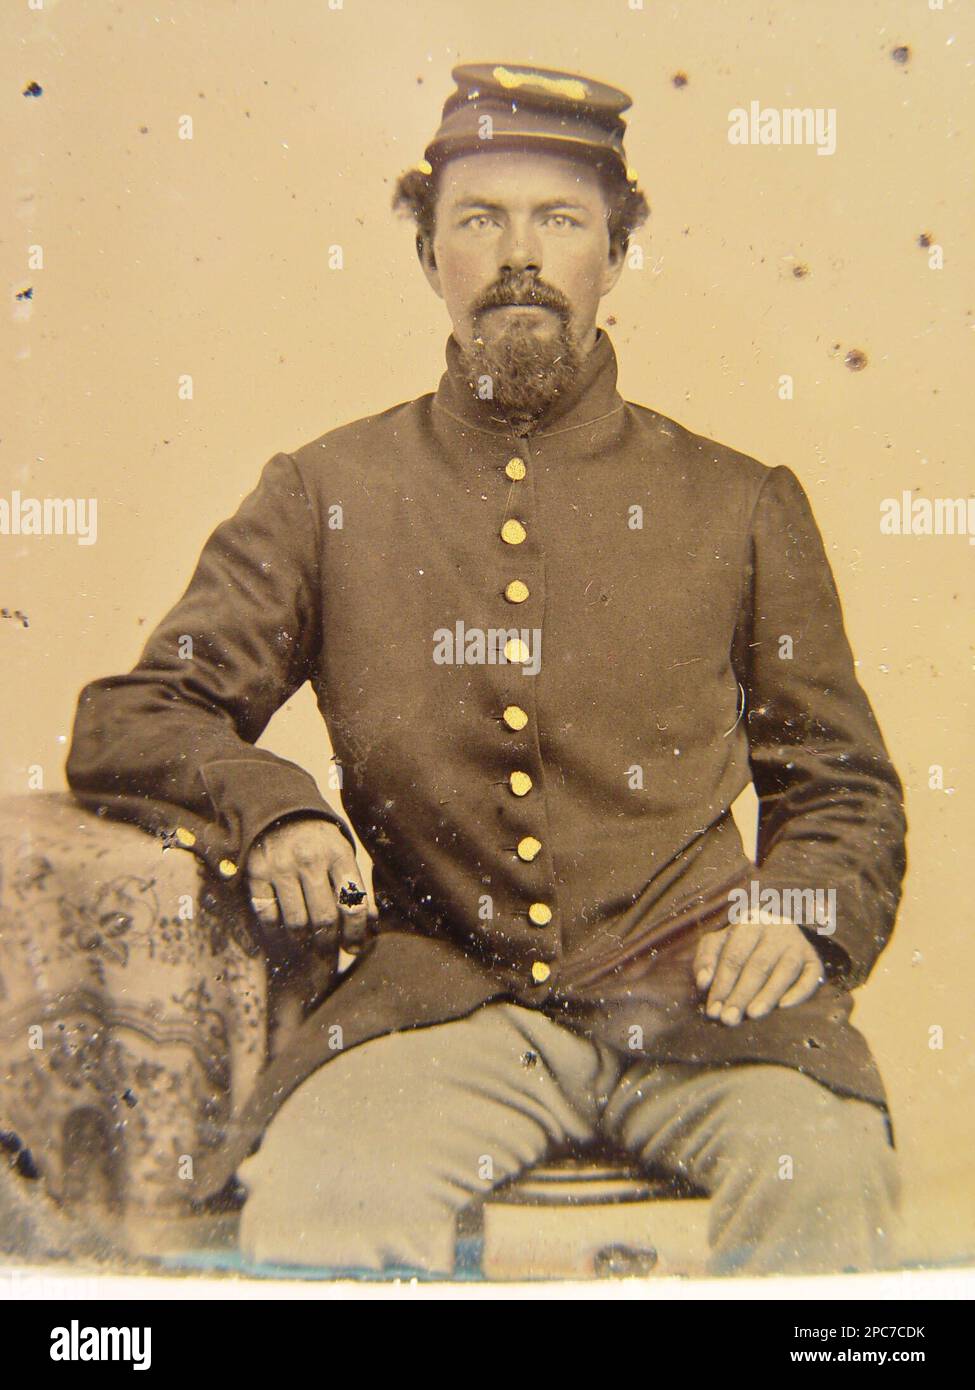 Unidentified soldier in Union uniform. United States, Army, People, 1860-1870, Soldiers, Union, 1860-1870, Military uniforms, Union, 1860-1870, United States, History, Civil War, 1861-1865, Military personnel, Union. Stock Photo